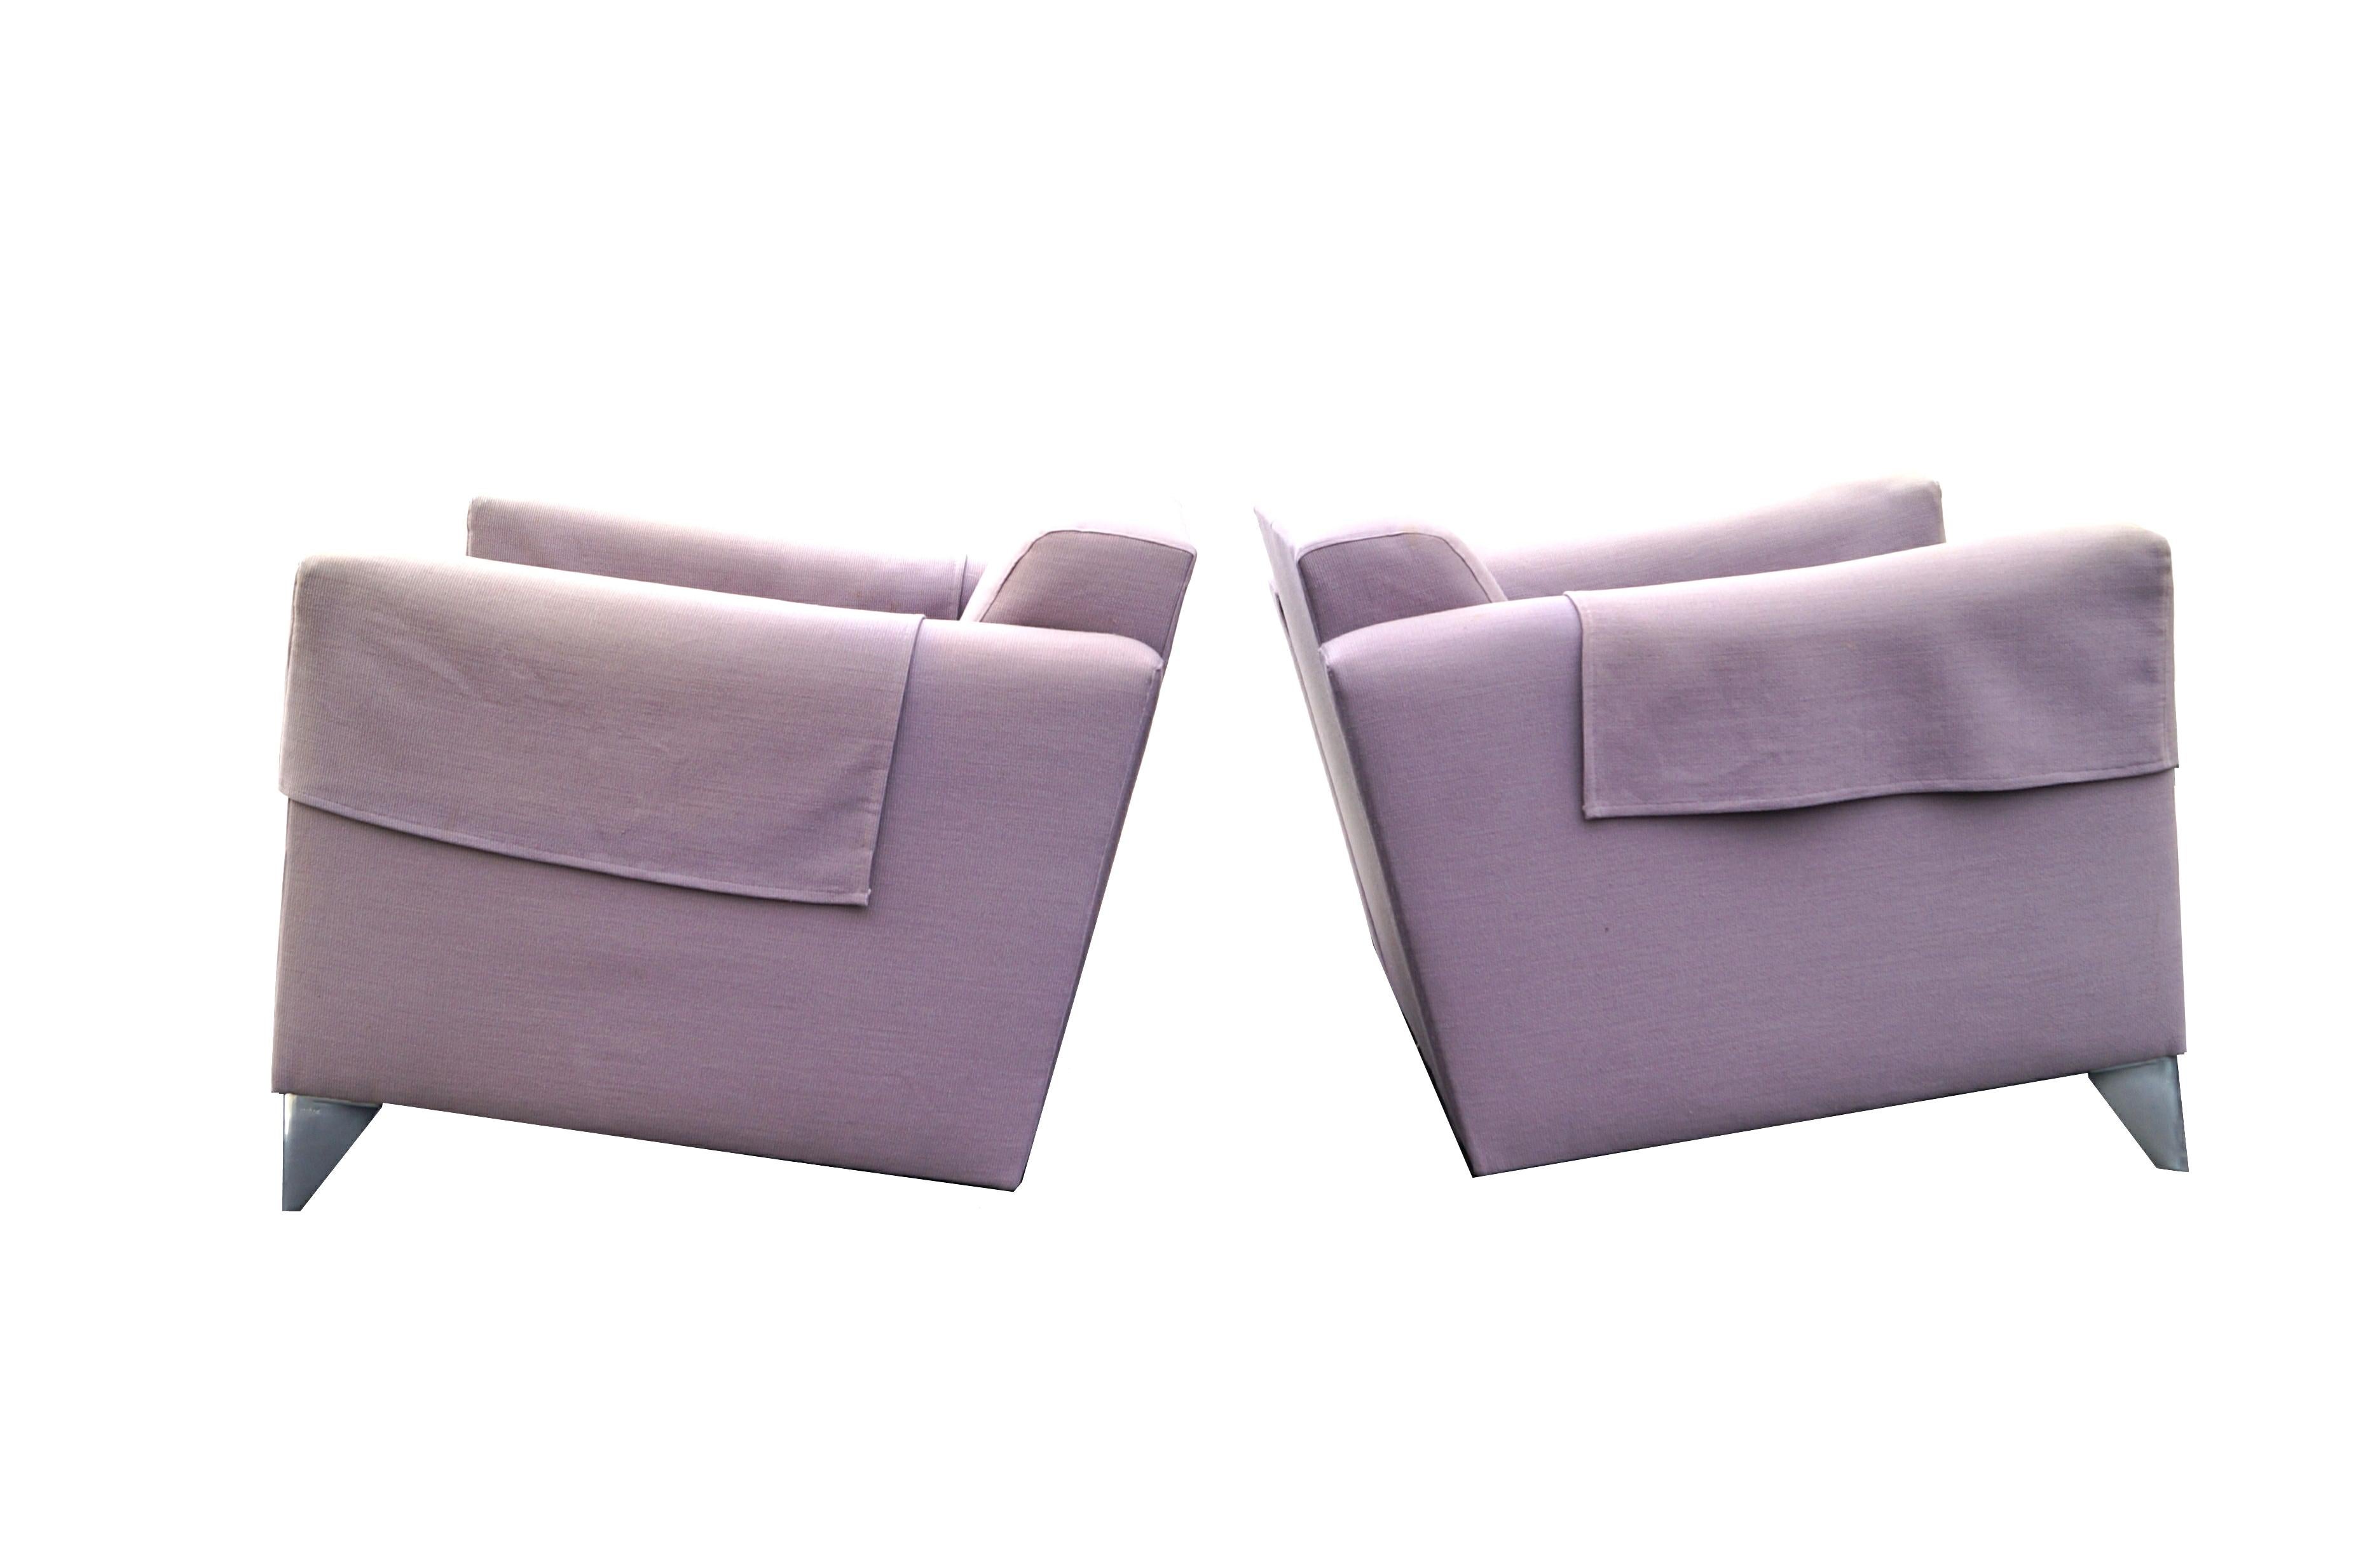 French Pair of Len Niggelman Lounge Club Slipper Chairs by Philippe Starck